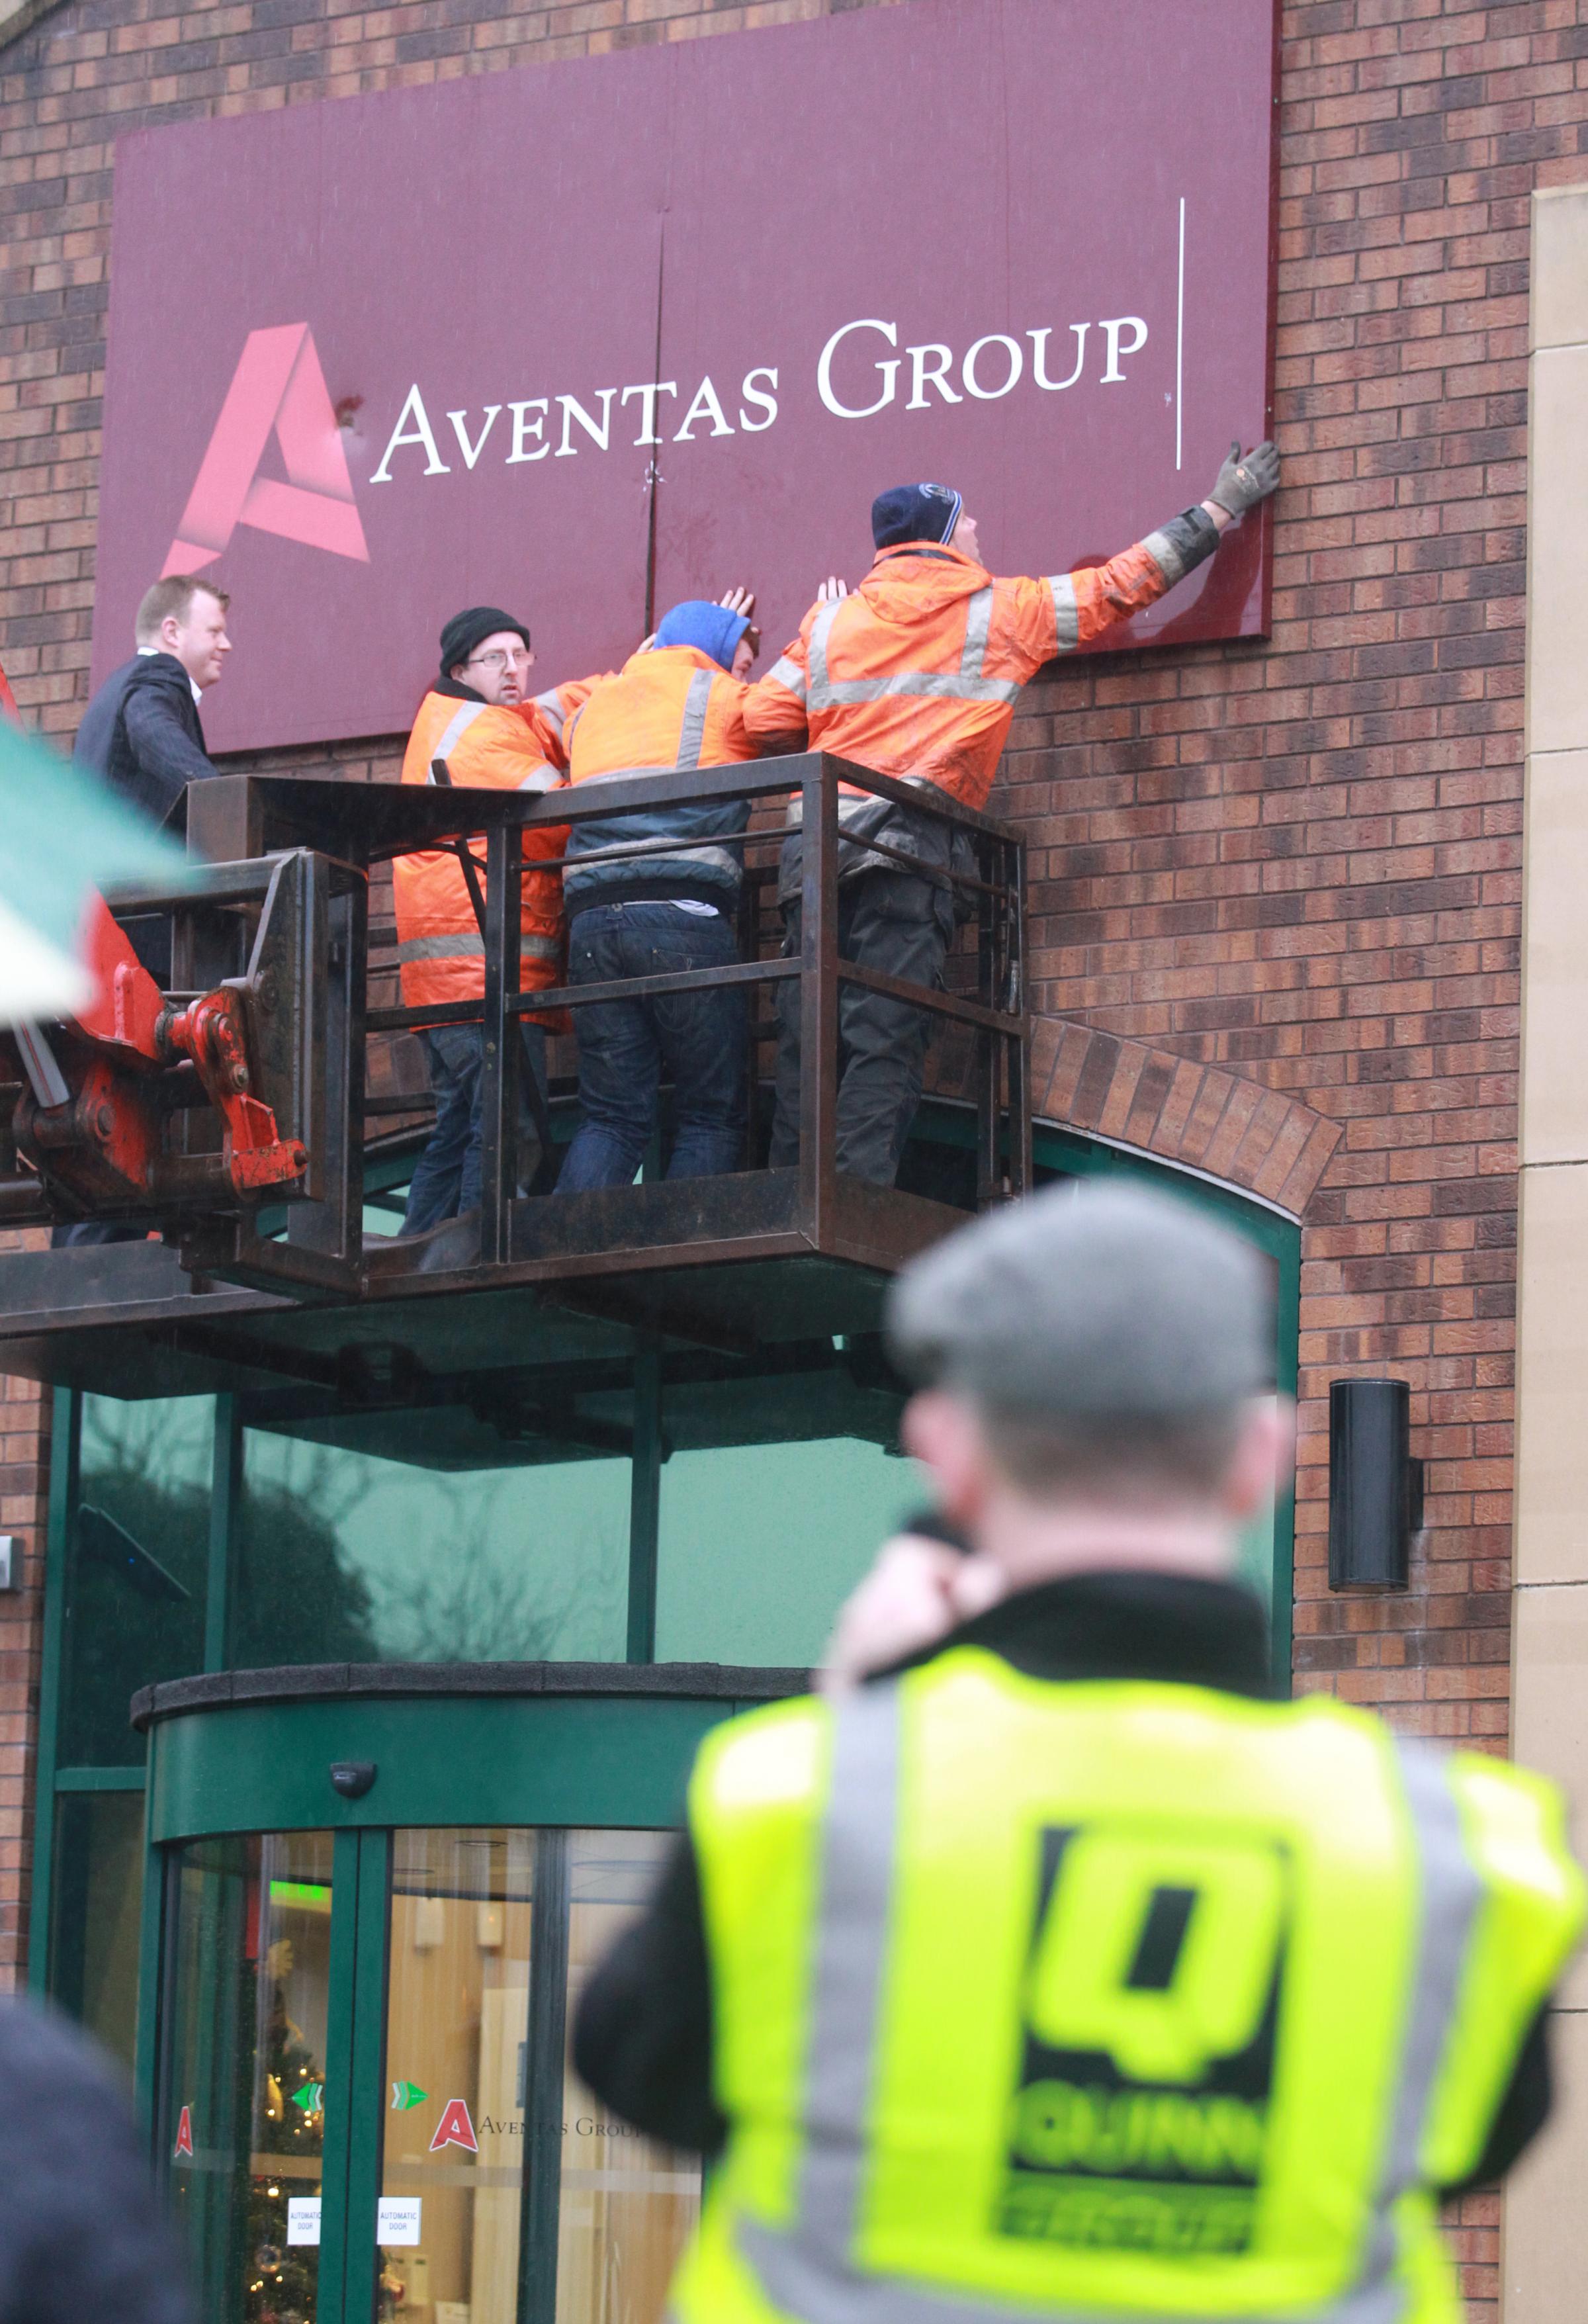 © picture by John McVitty, Enniskillen, Co.Fermanagh, N. Ireland - 07771987378 © The Aventas Group sign being removed.